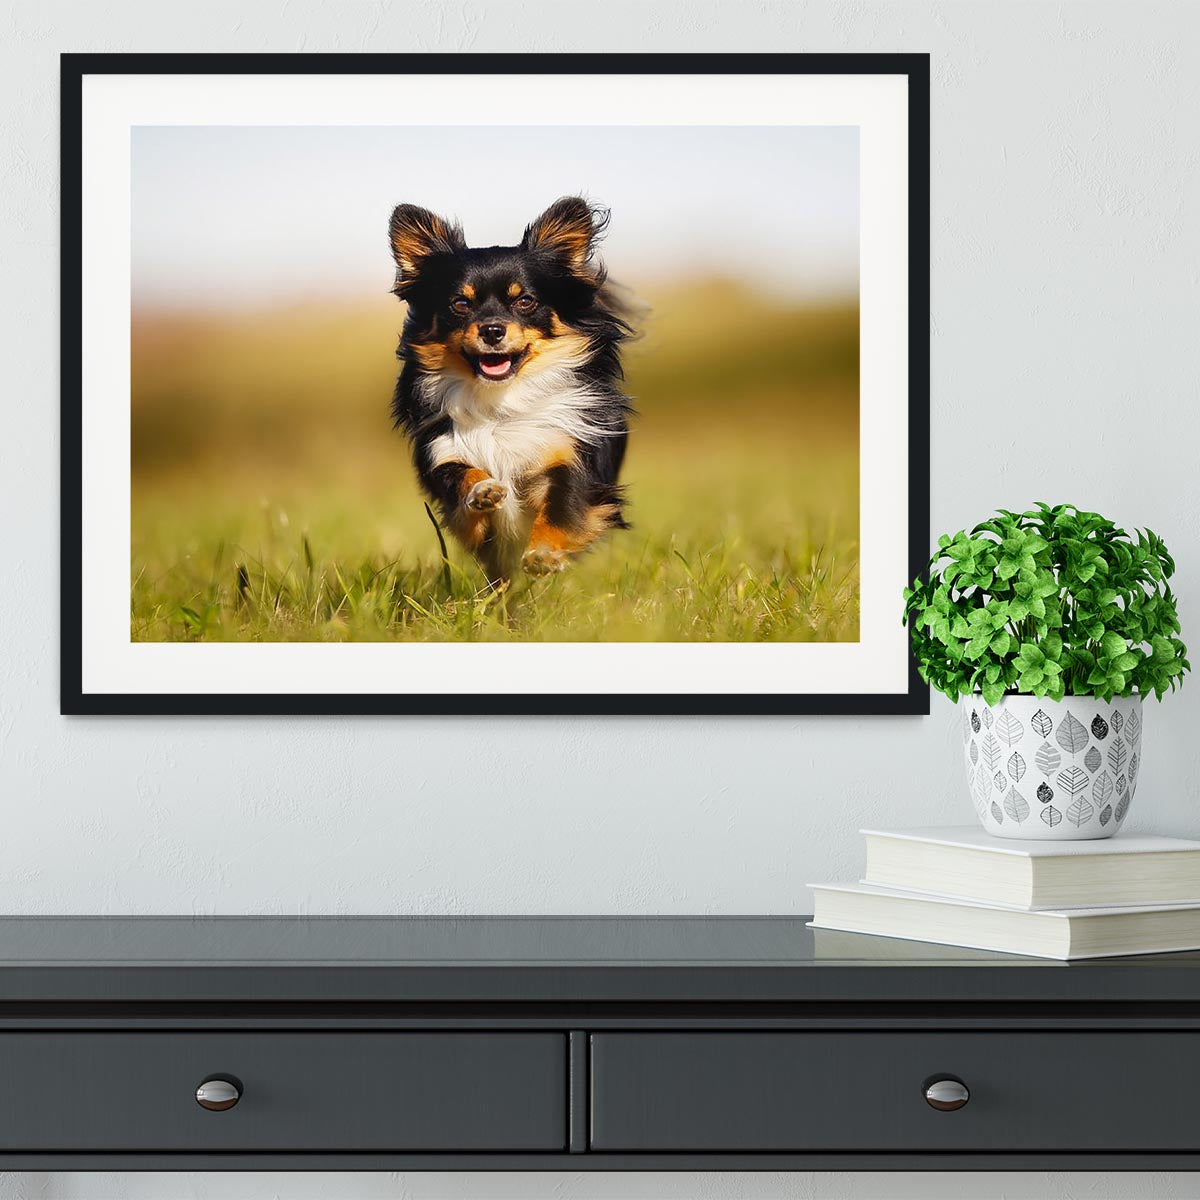 Chihuahua dog running towards the camera in a grass field Framed Print - Canvas Art Rocks - 1